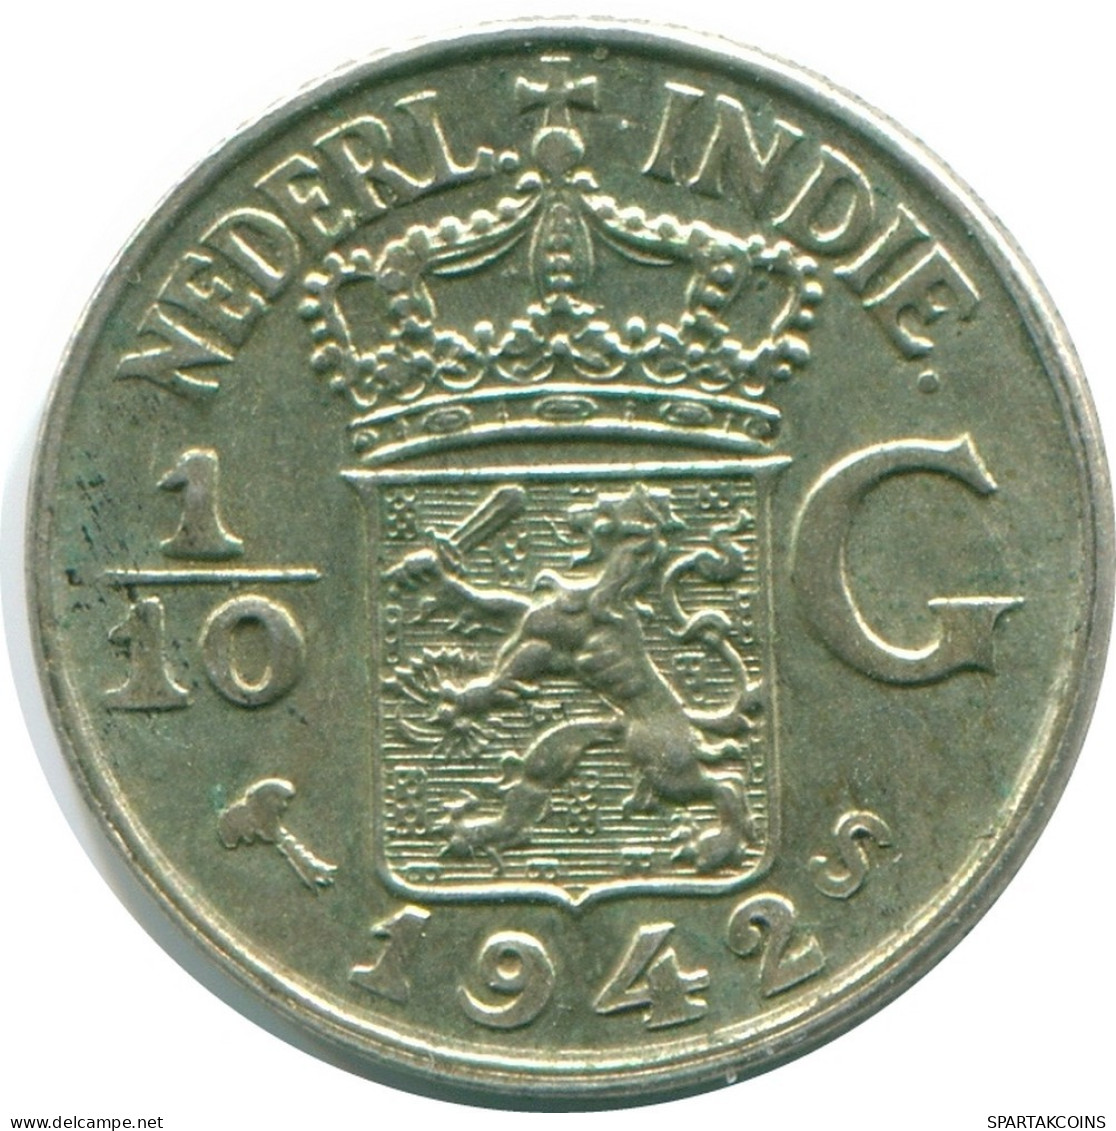 1/10 GULDEN 1942 NETHERLANDS EAST INDIES SILVER Colonial Coin #NL13931.3.U.A - Dutch East Indies